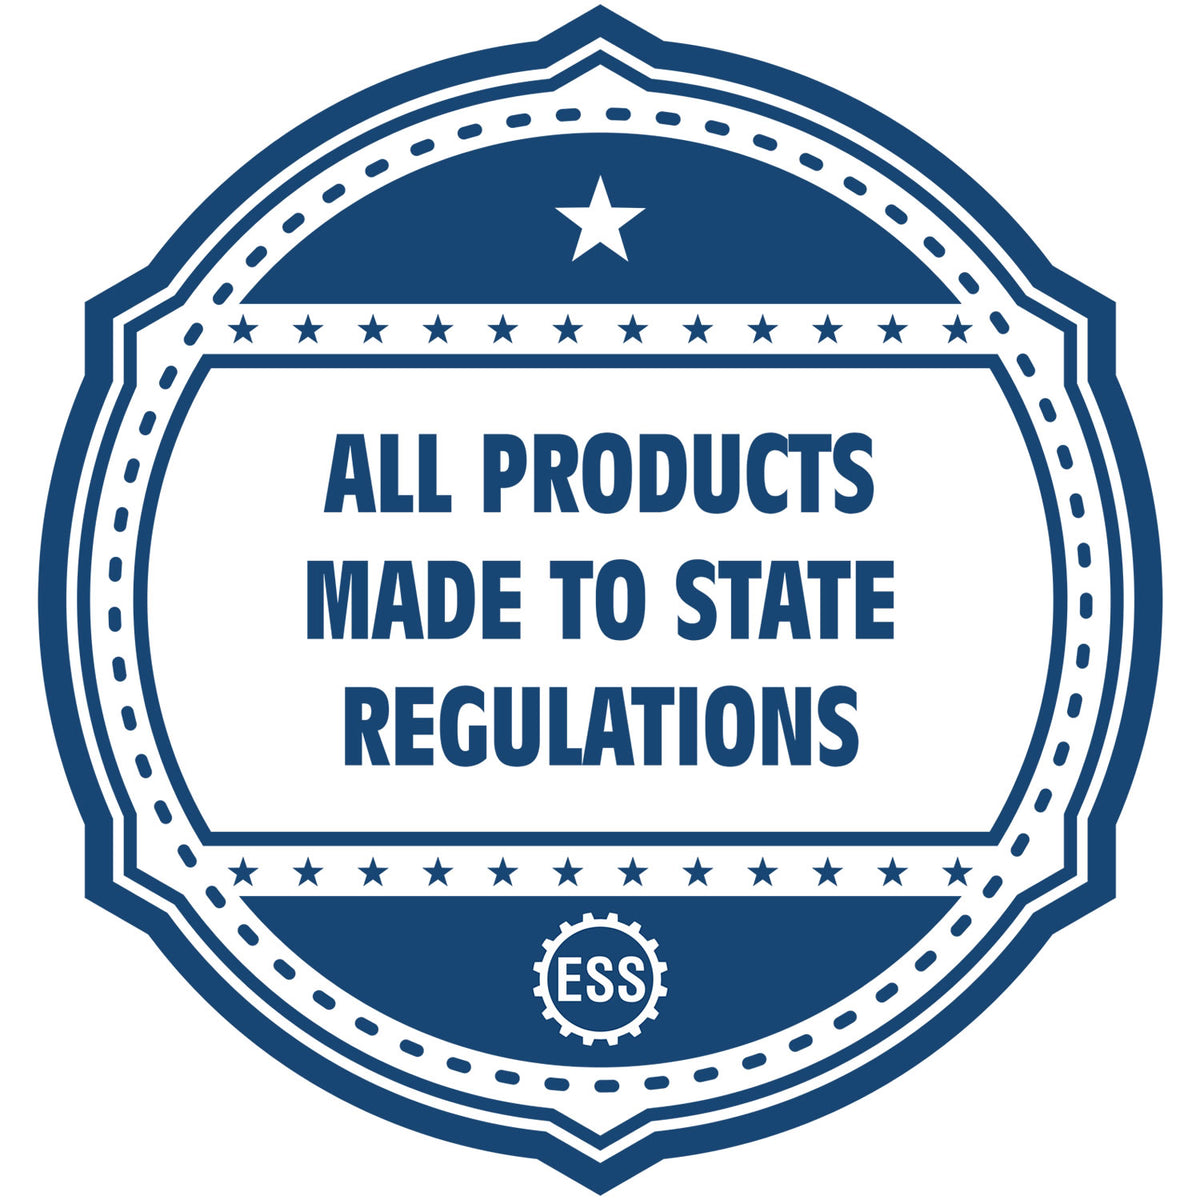 An icon or badge element for the PSI Wisconsin Notary Stamp showing that this product is made in compliance with state regulations.